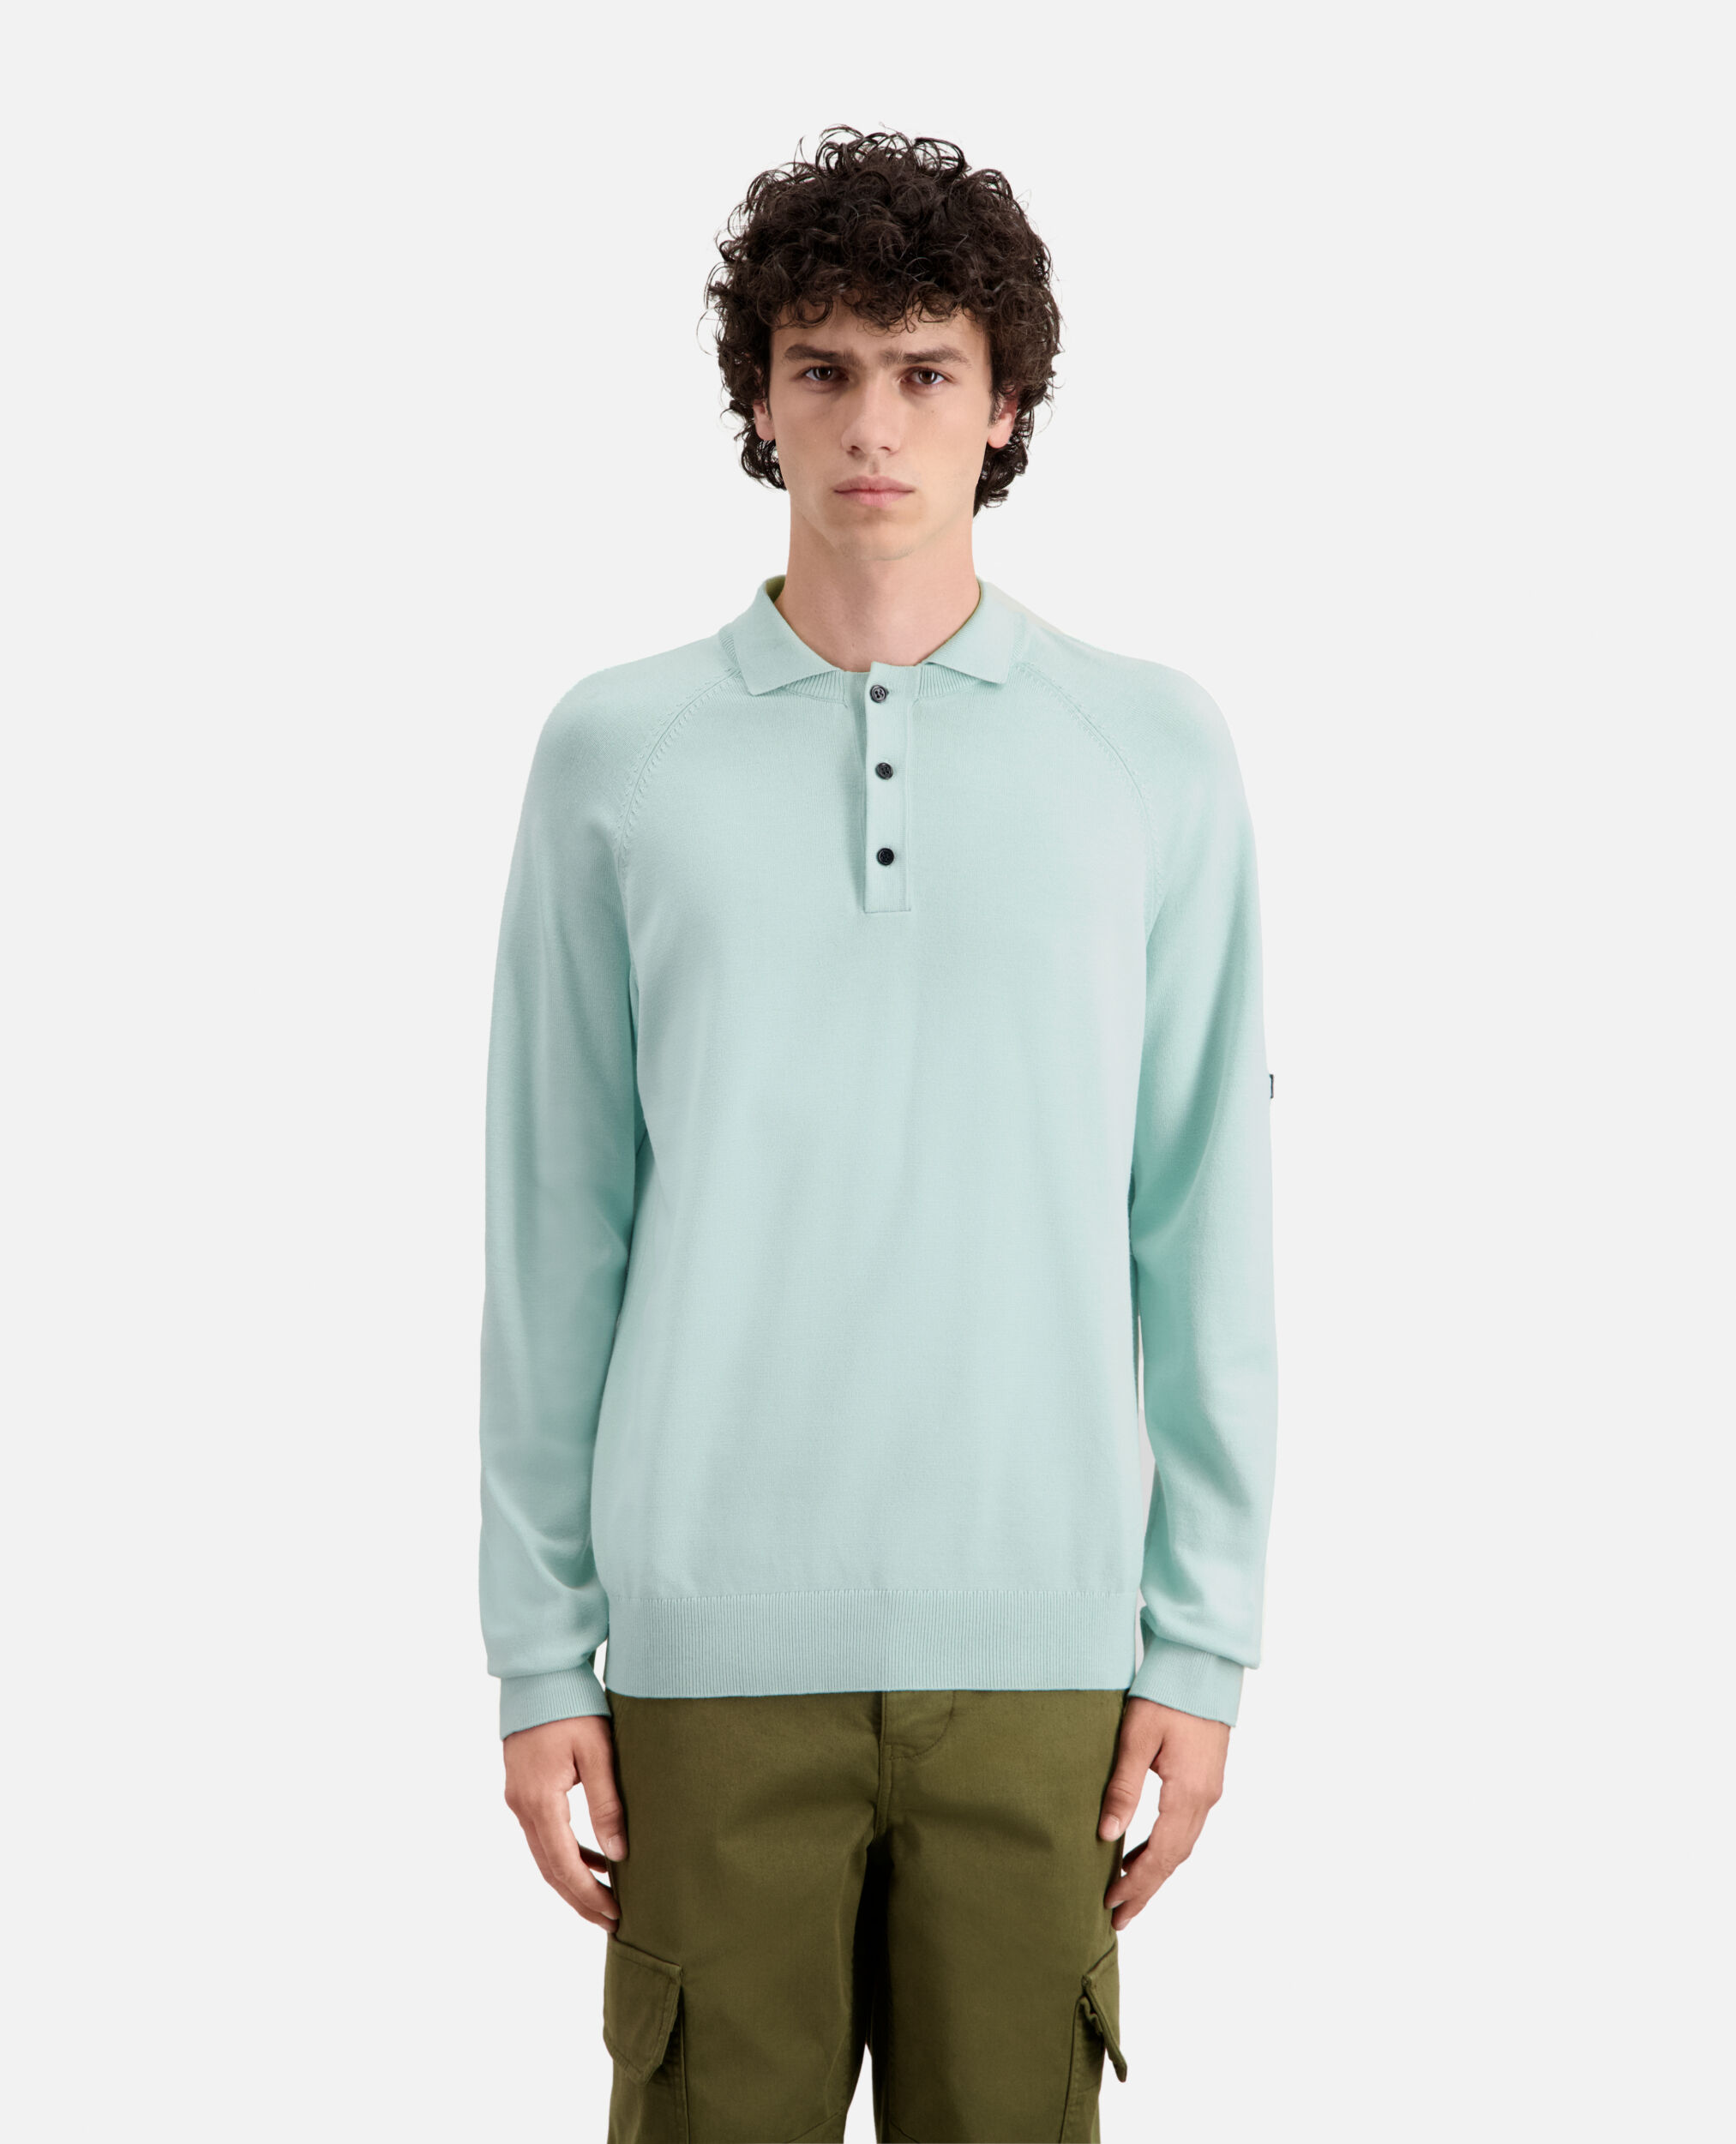 Green knit polo t-shirt, OCEAN, hi-res image number null